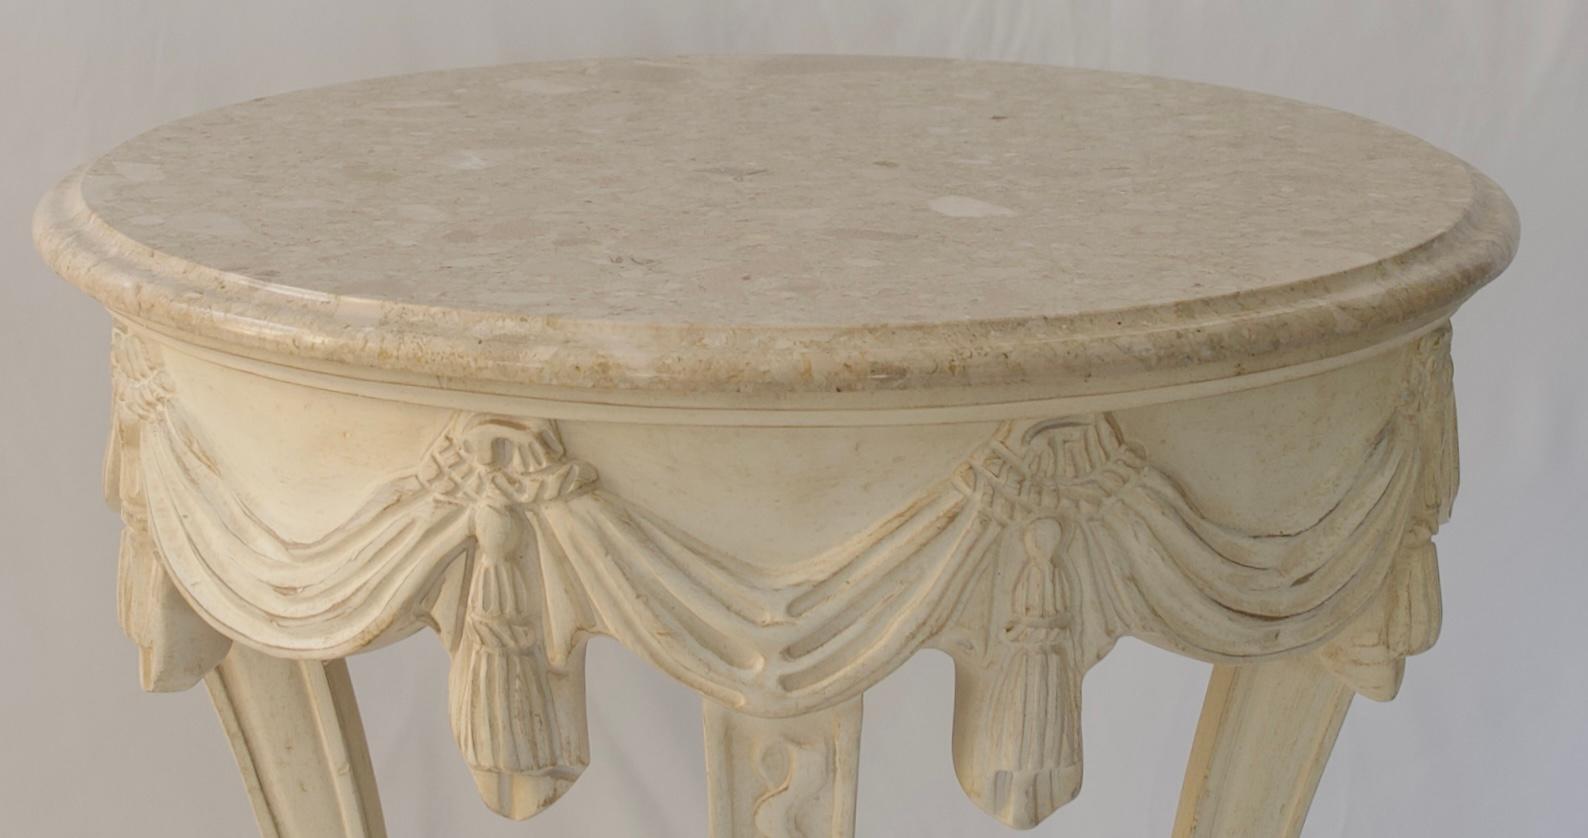 Vintage French Louis XVI style side table with a beige Italian marble top. 
The motifs around the top and the curved legs make this stylish French Louis XVI style side table particularly appealing. 
Hand-carved motifs on the apron resembling